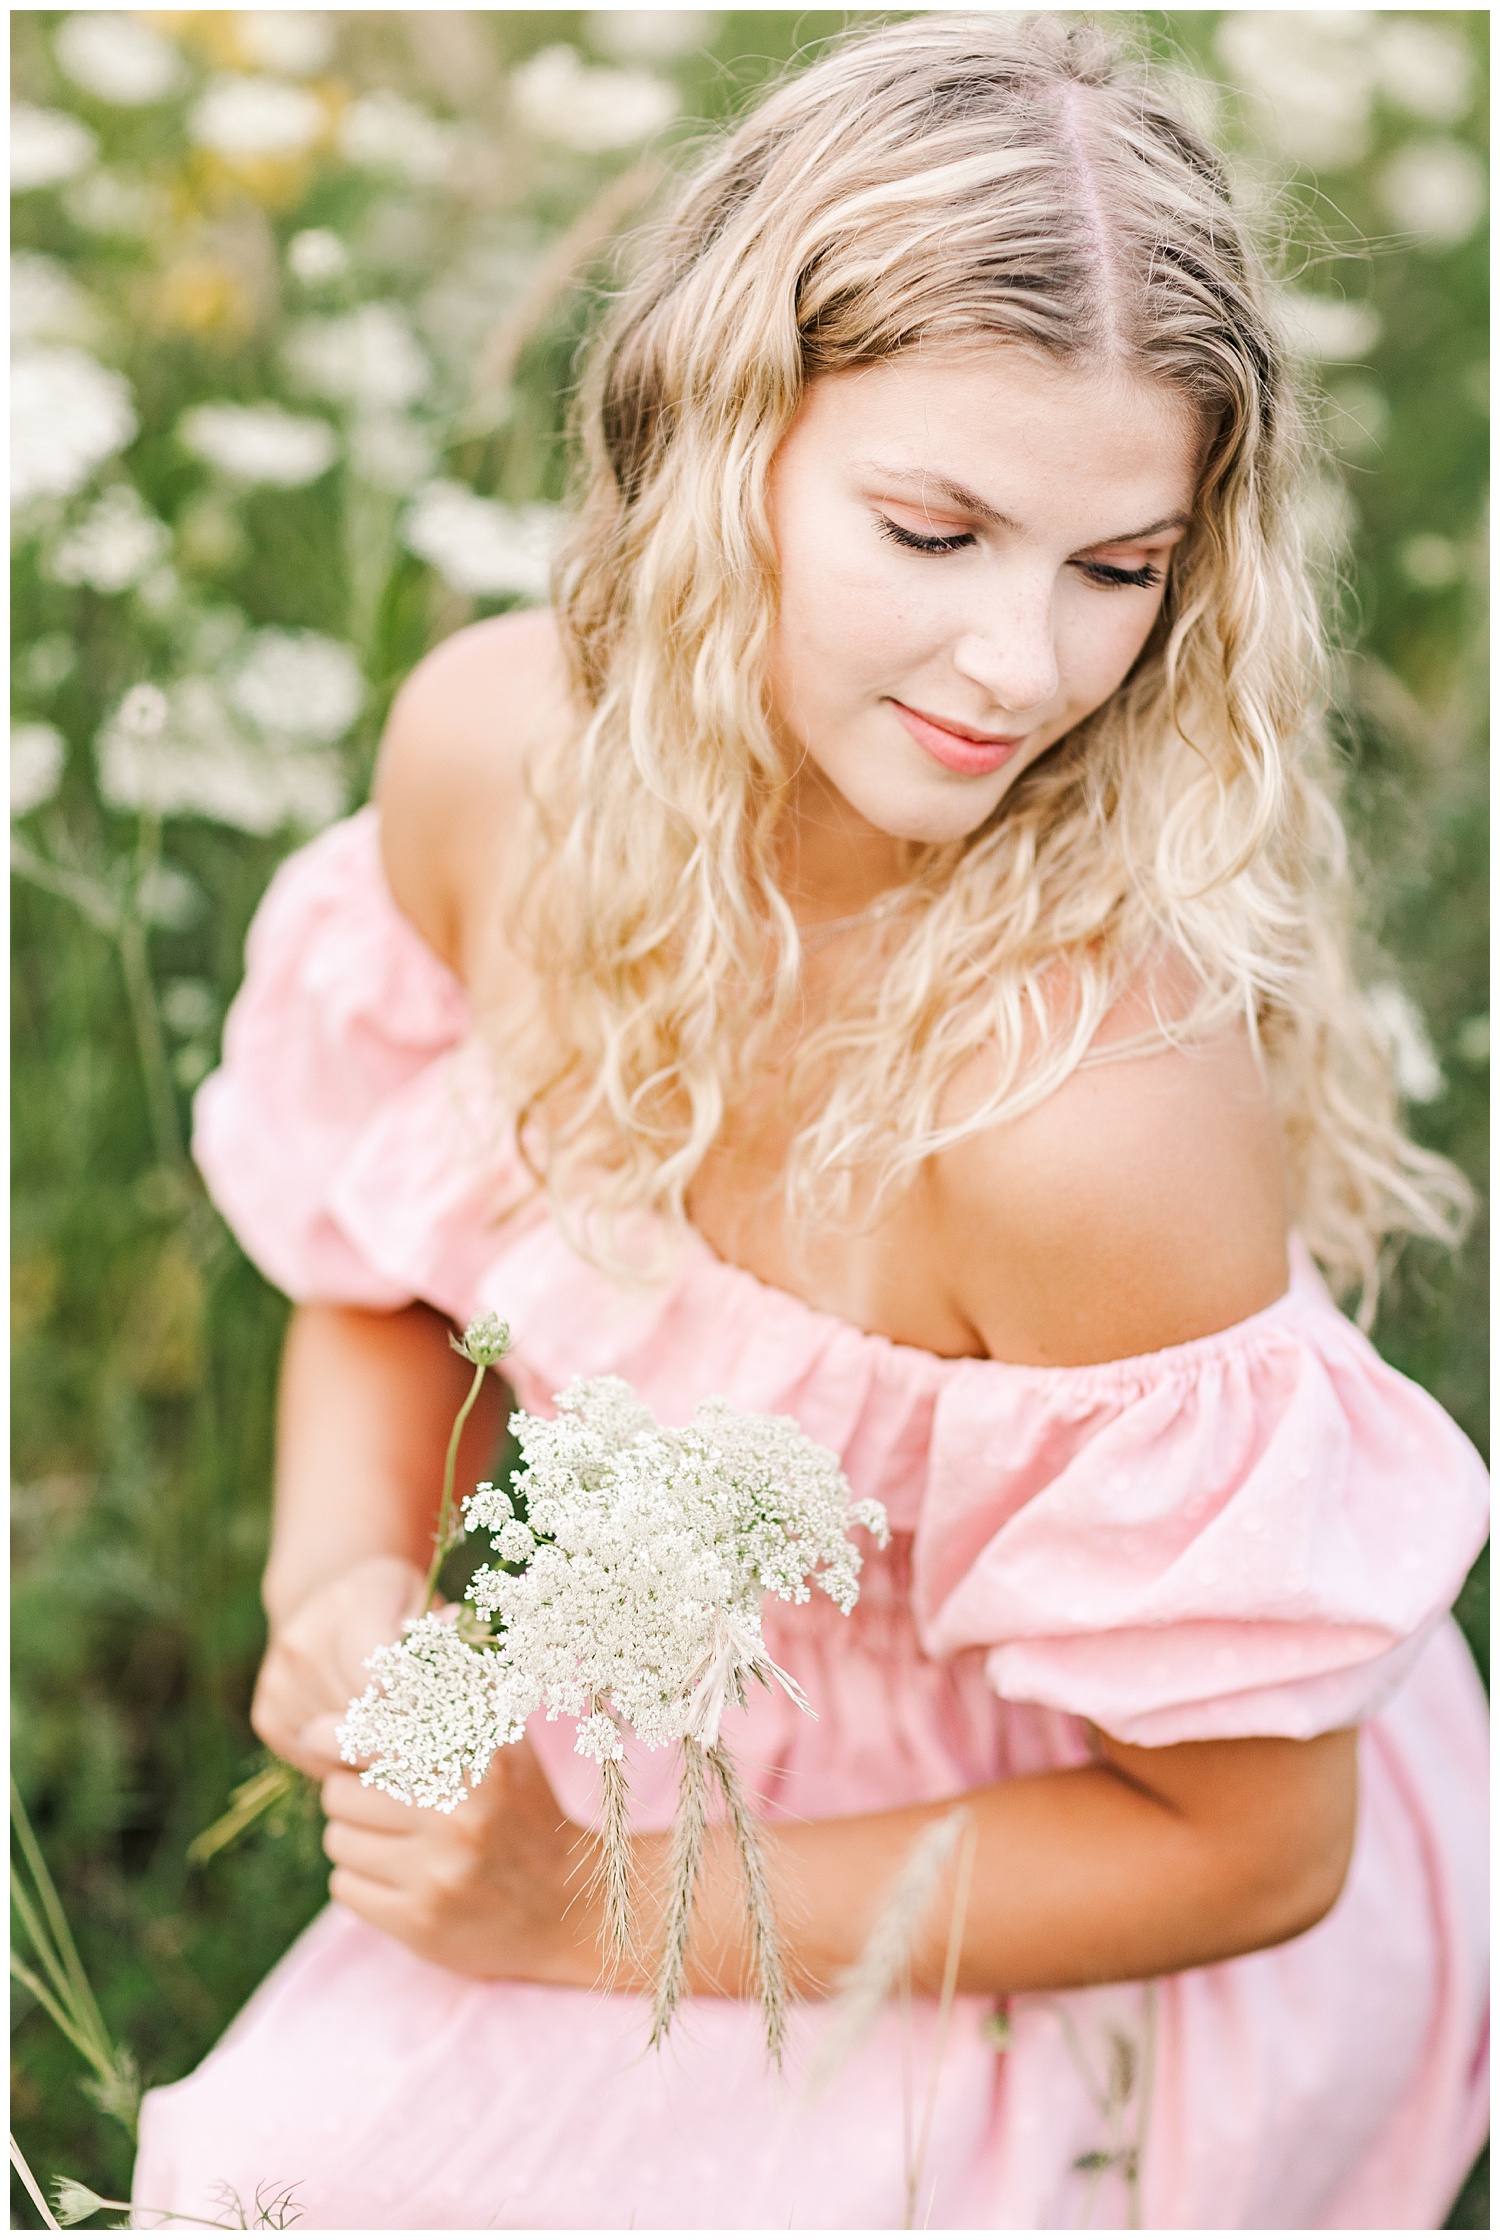 Senior Rachel wearing a light pink off the shoulder dress crouches down in a wildflower field | CB Studio